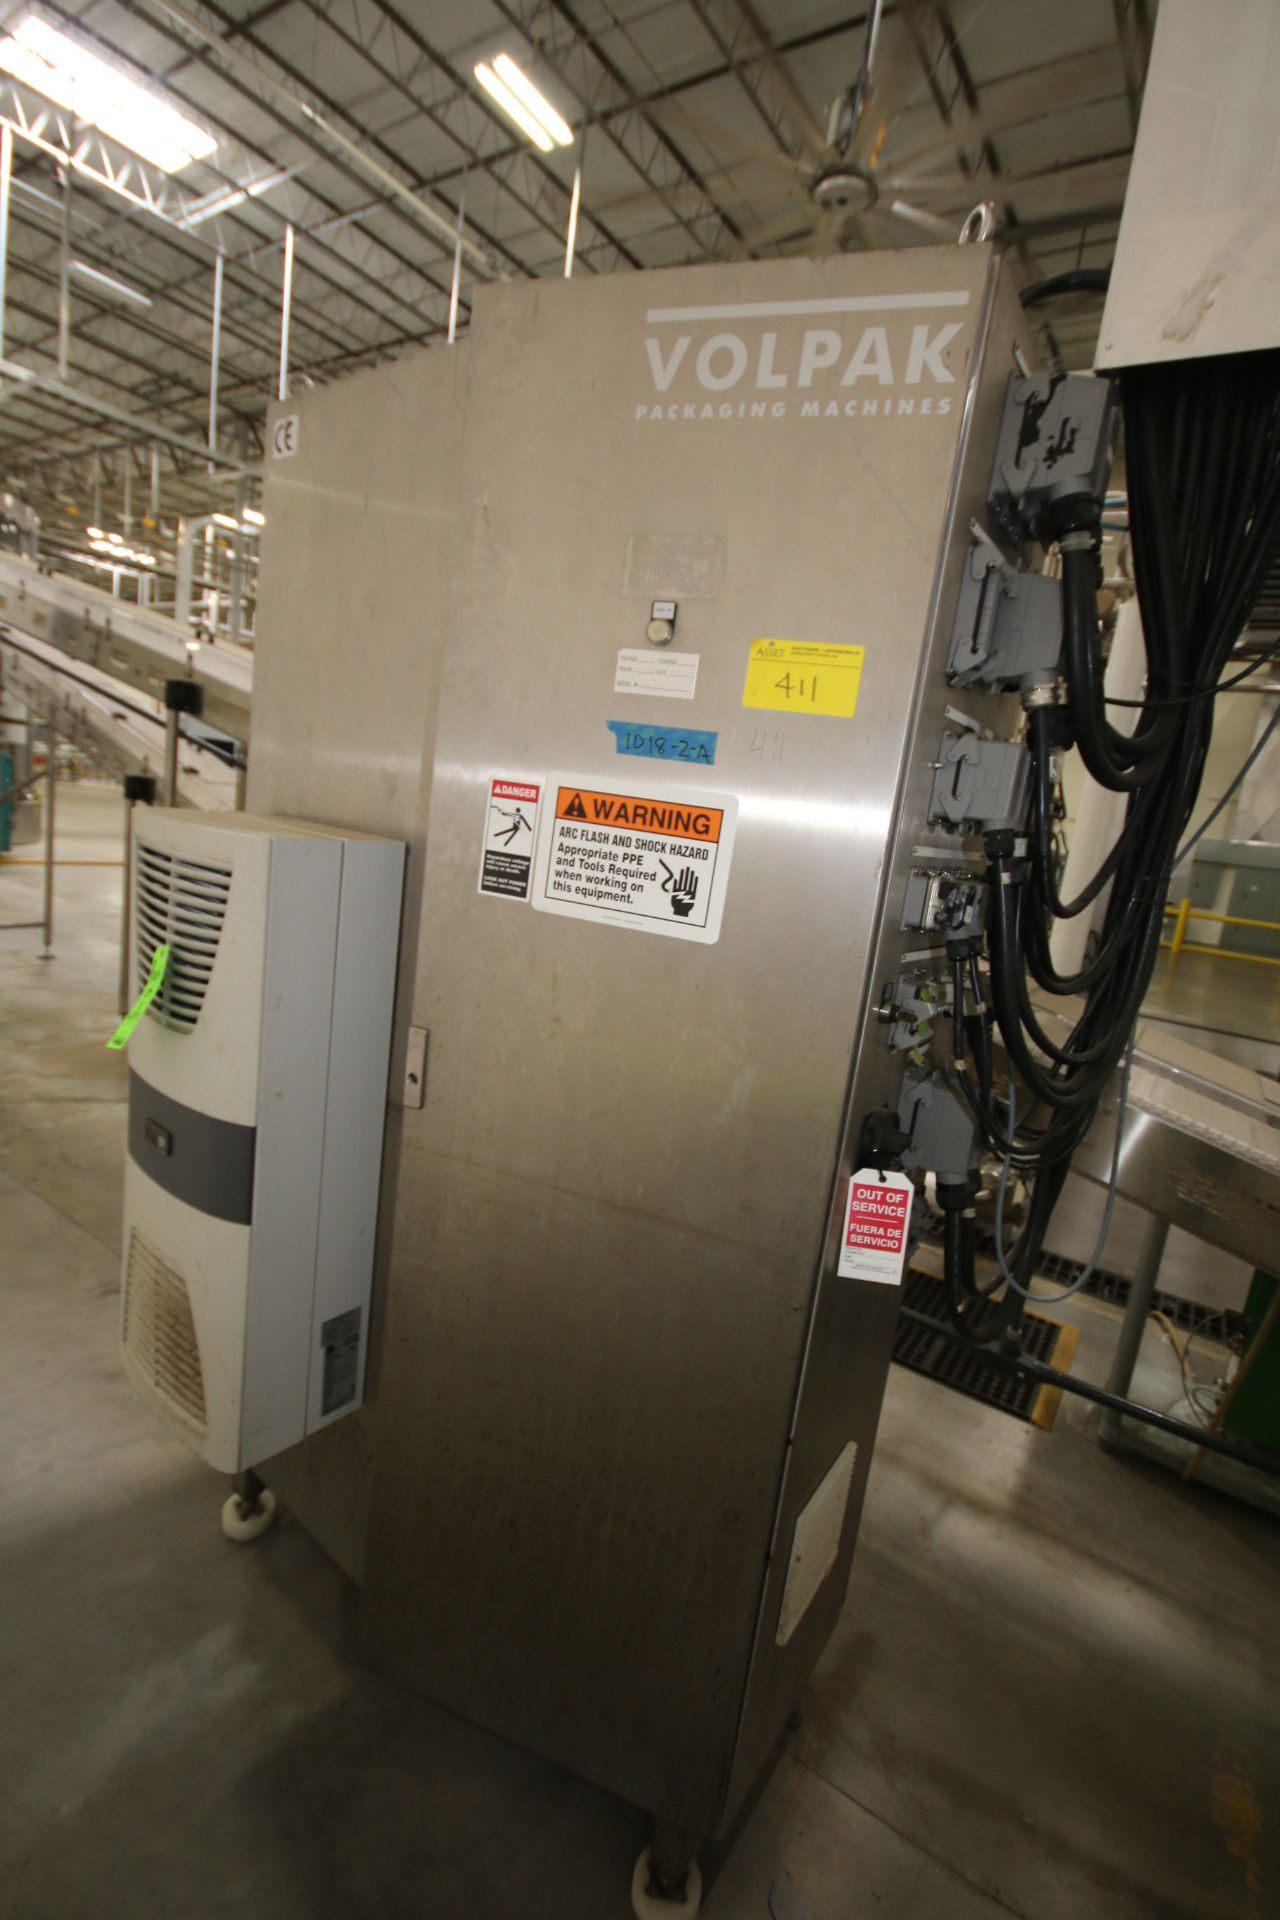 Volpak Pouch Filler, M/N S-240-DF, Fecha 14-04-00, N Fab 1018-2-A, with S/S Infeed Vessel/Funnel and - Image 11 of 12